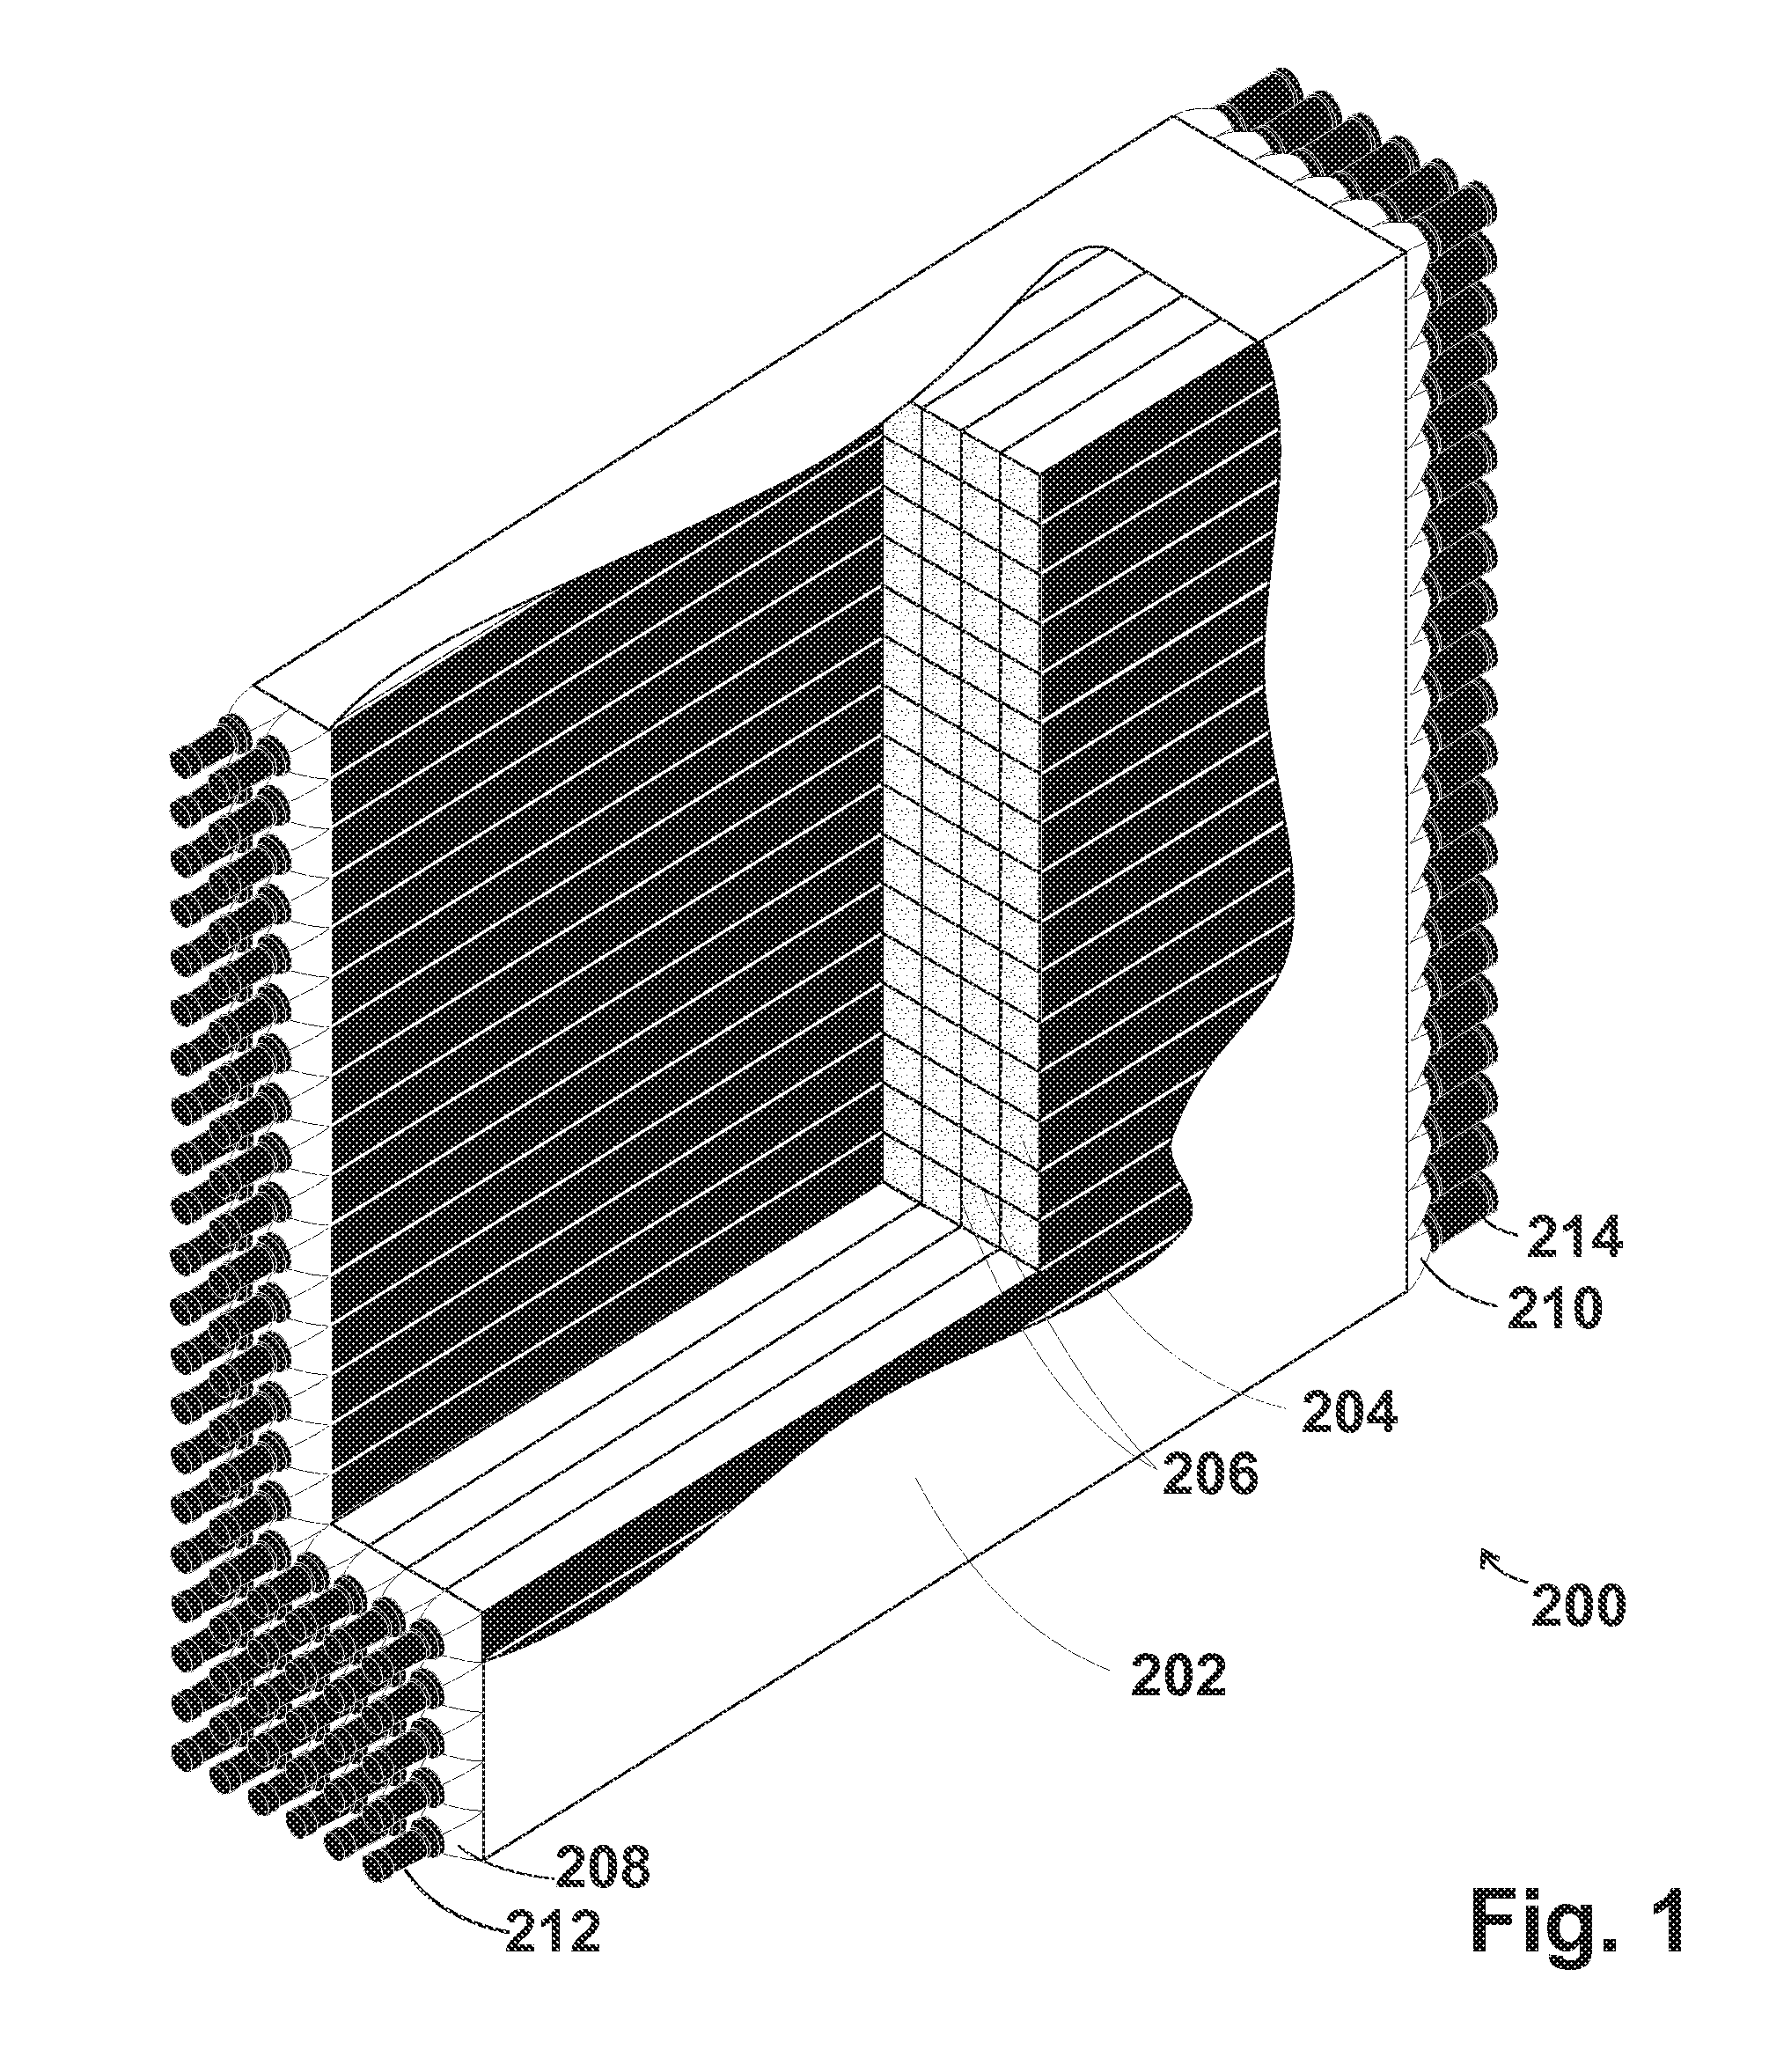 Methods and Apparatus for Improved Gamma Spectra Generation